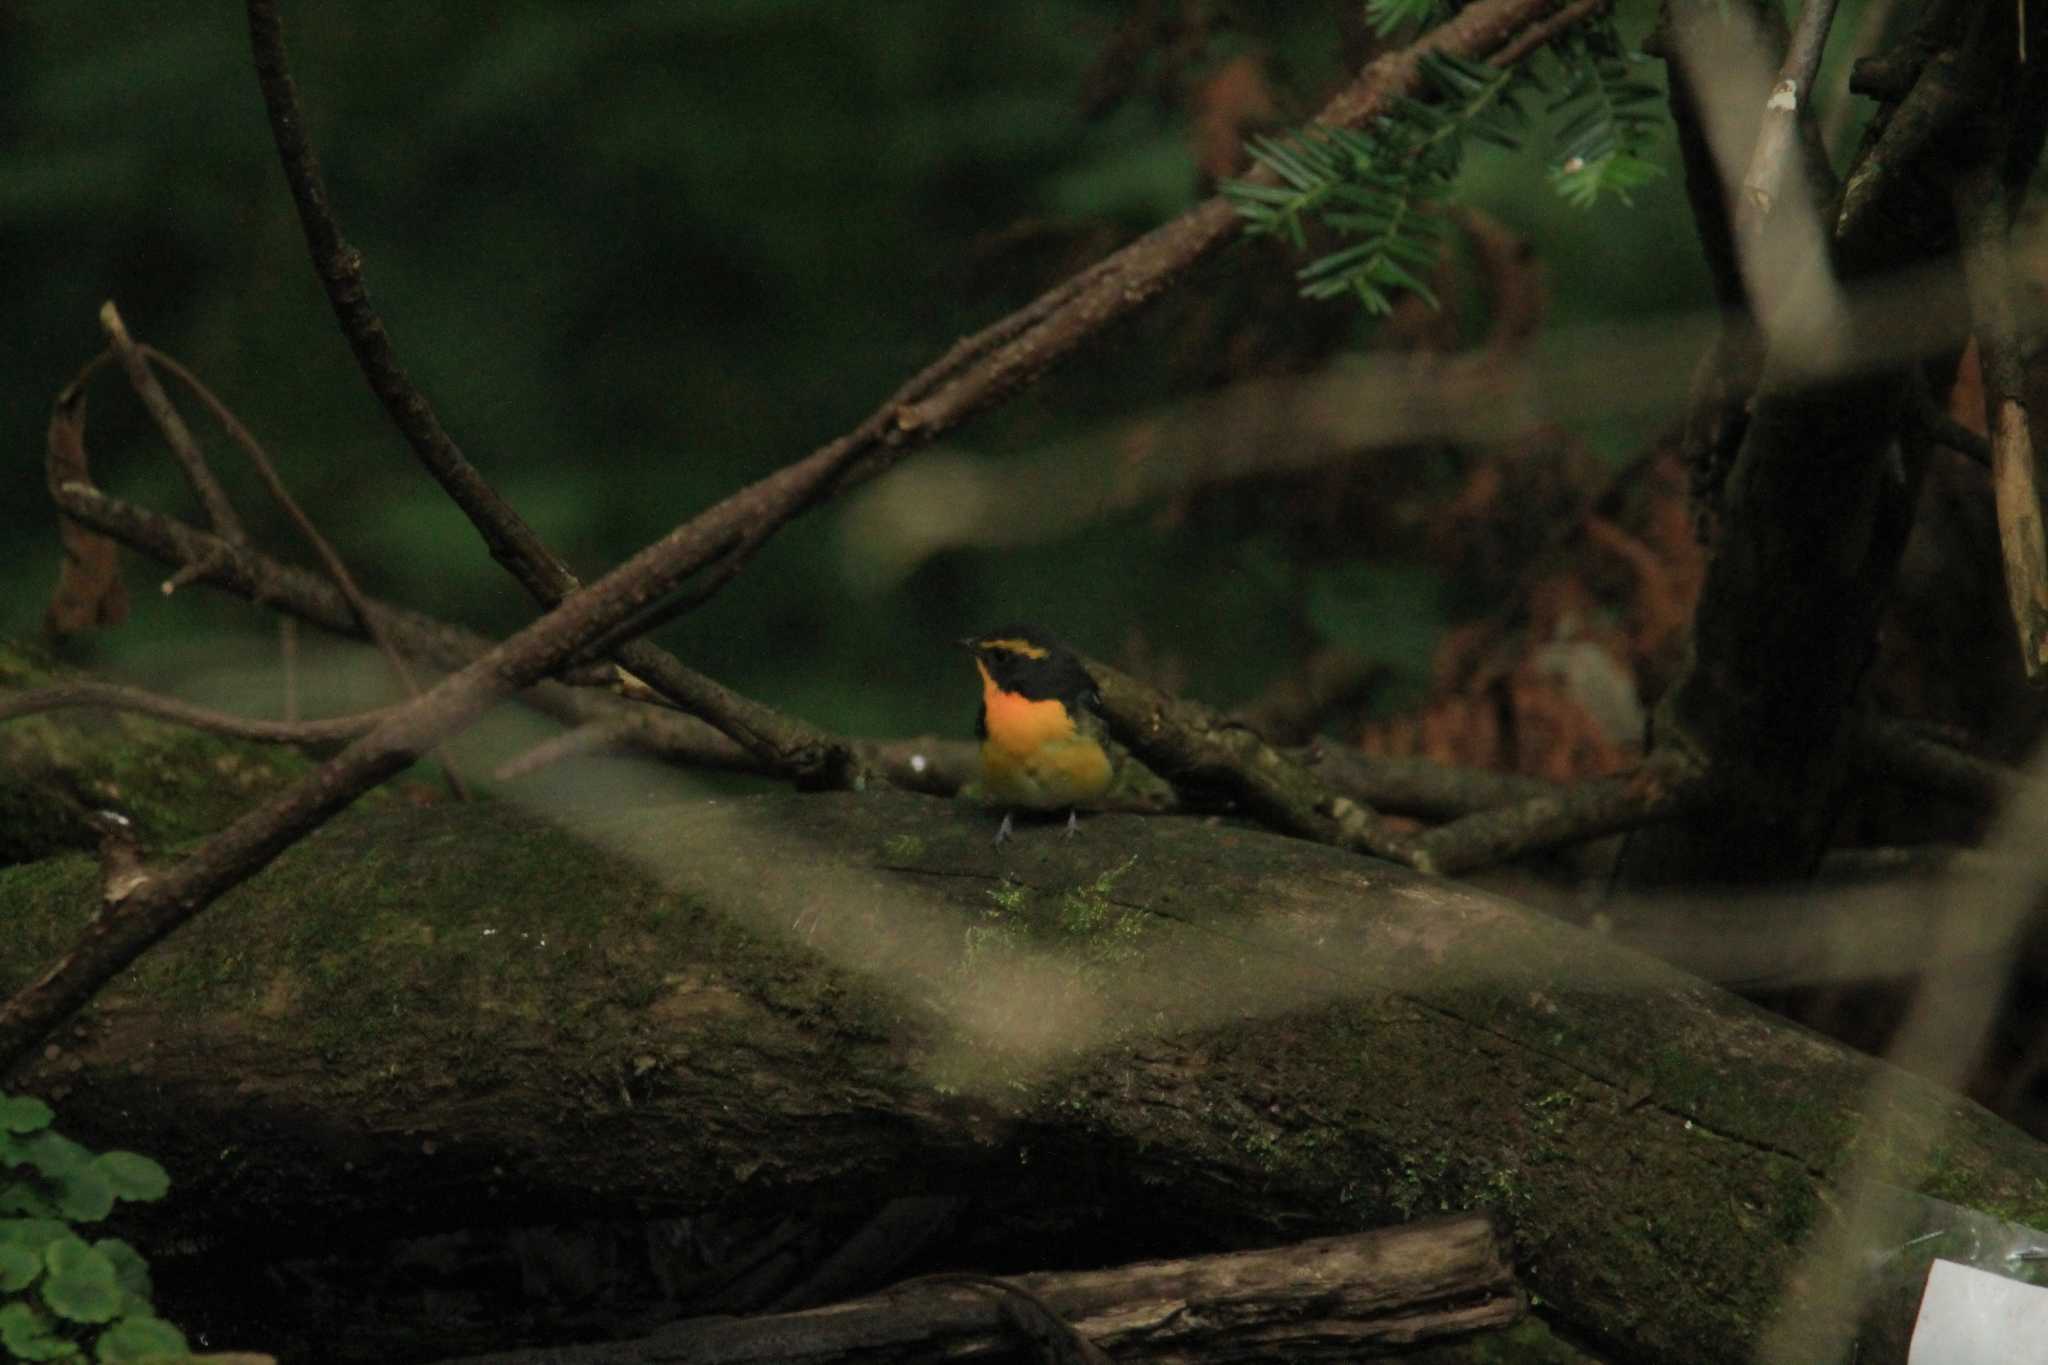 Photo of Narcissus Flycatcher at 滝沢森林公園ネイチャーセンター by ta@ta